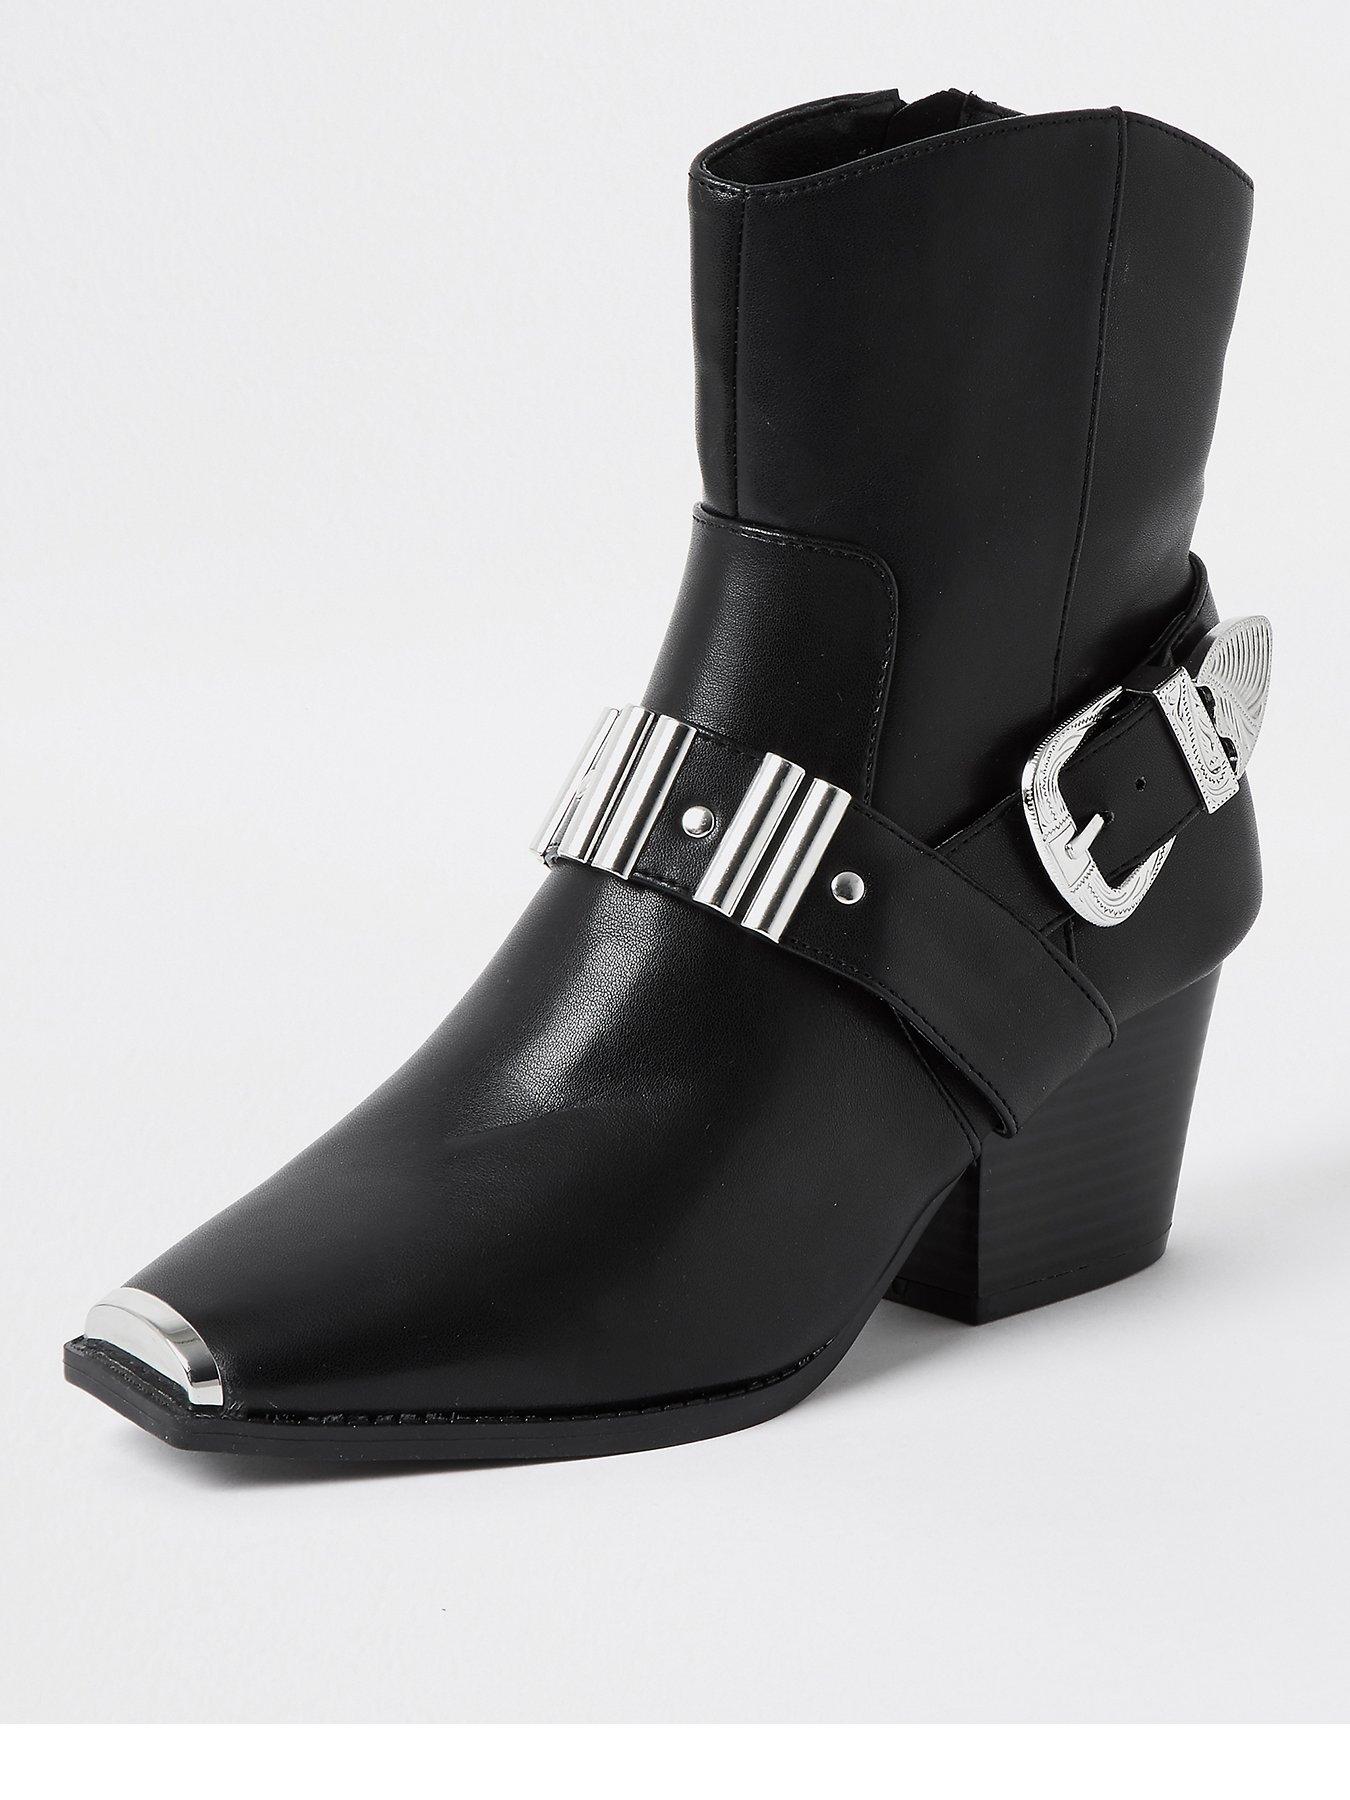 River Island Shoes | River Island Boots 